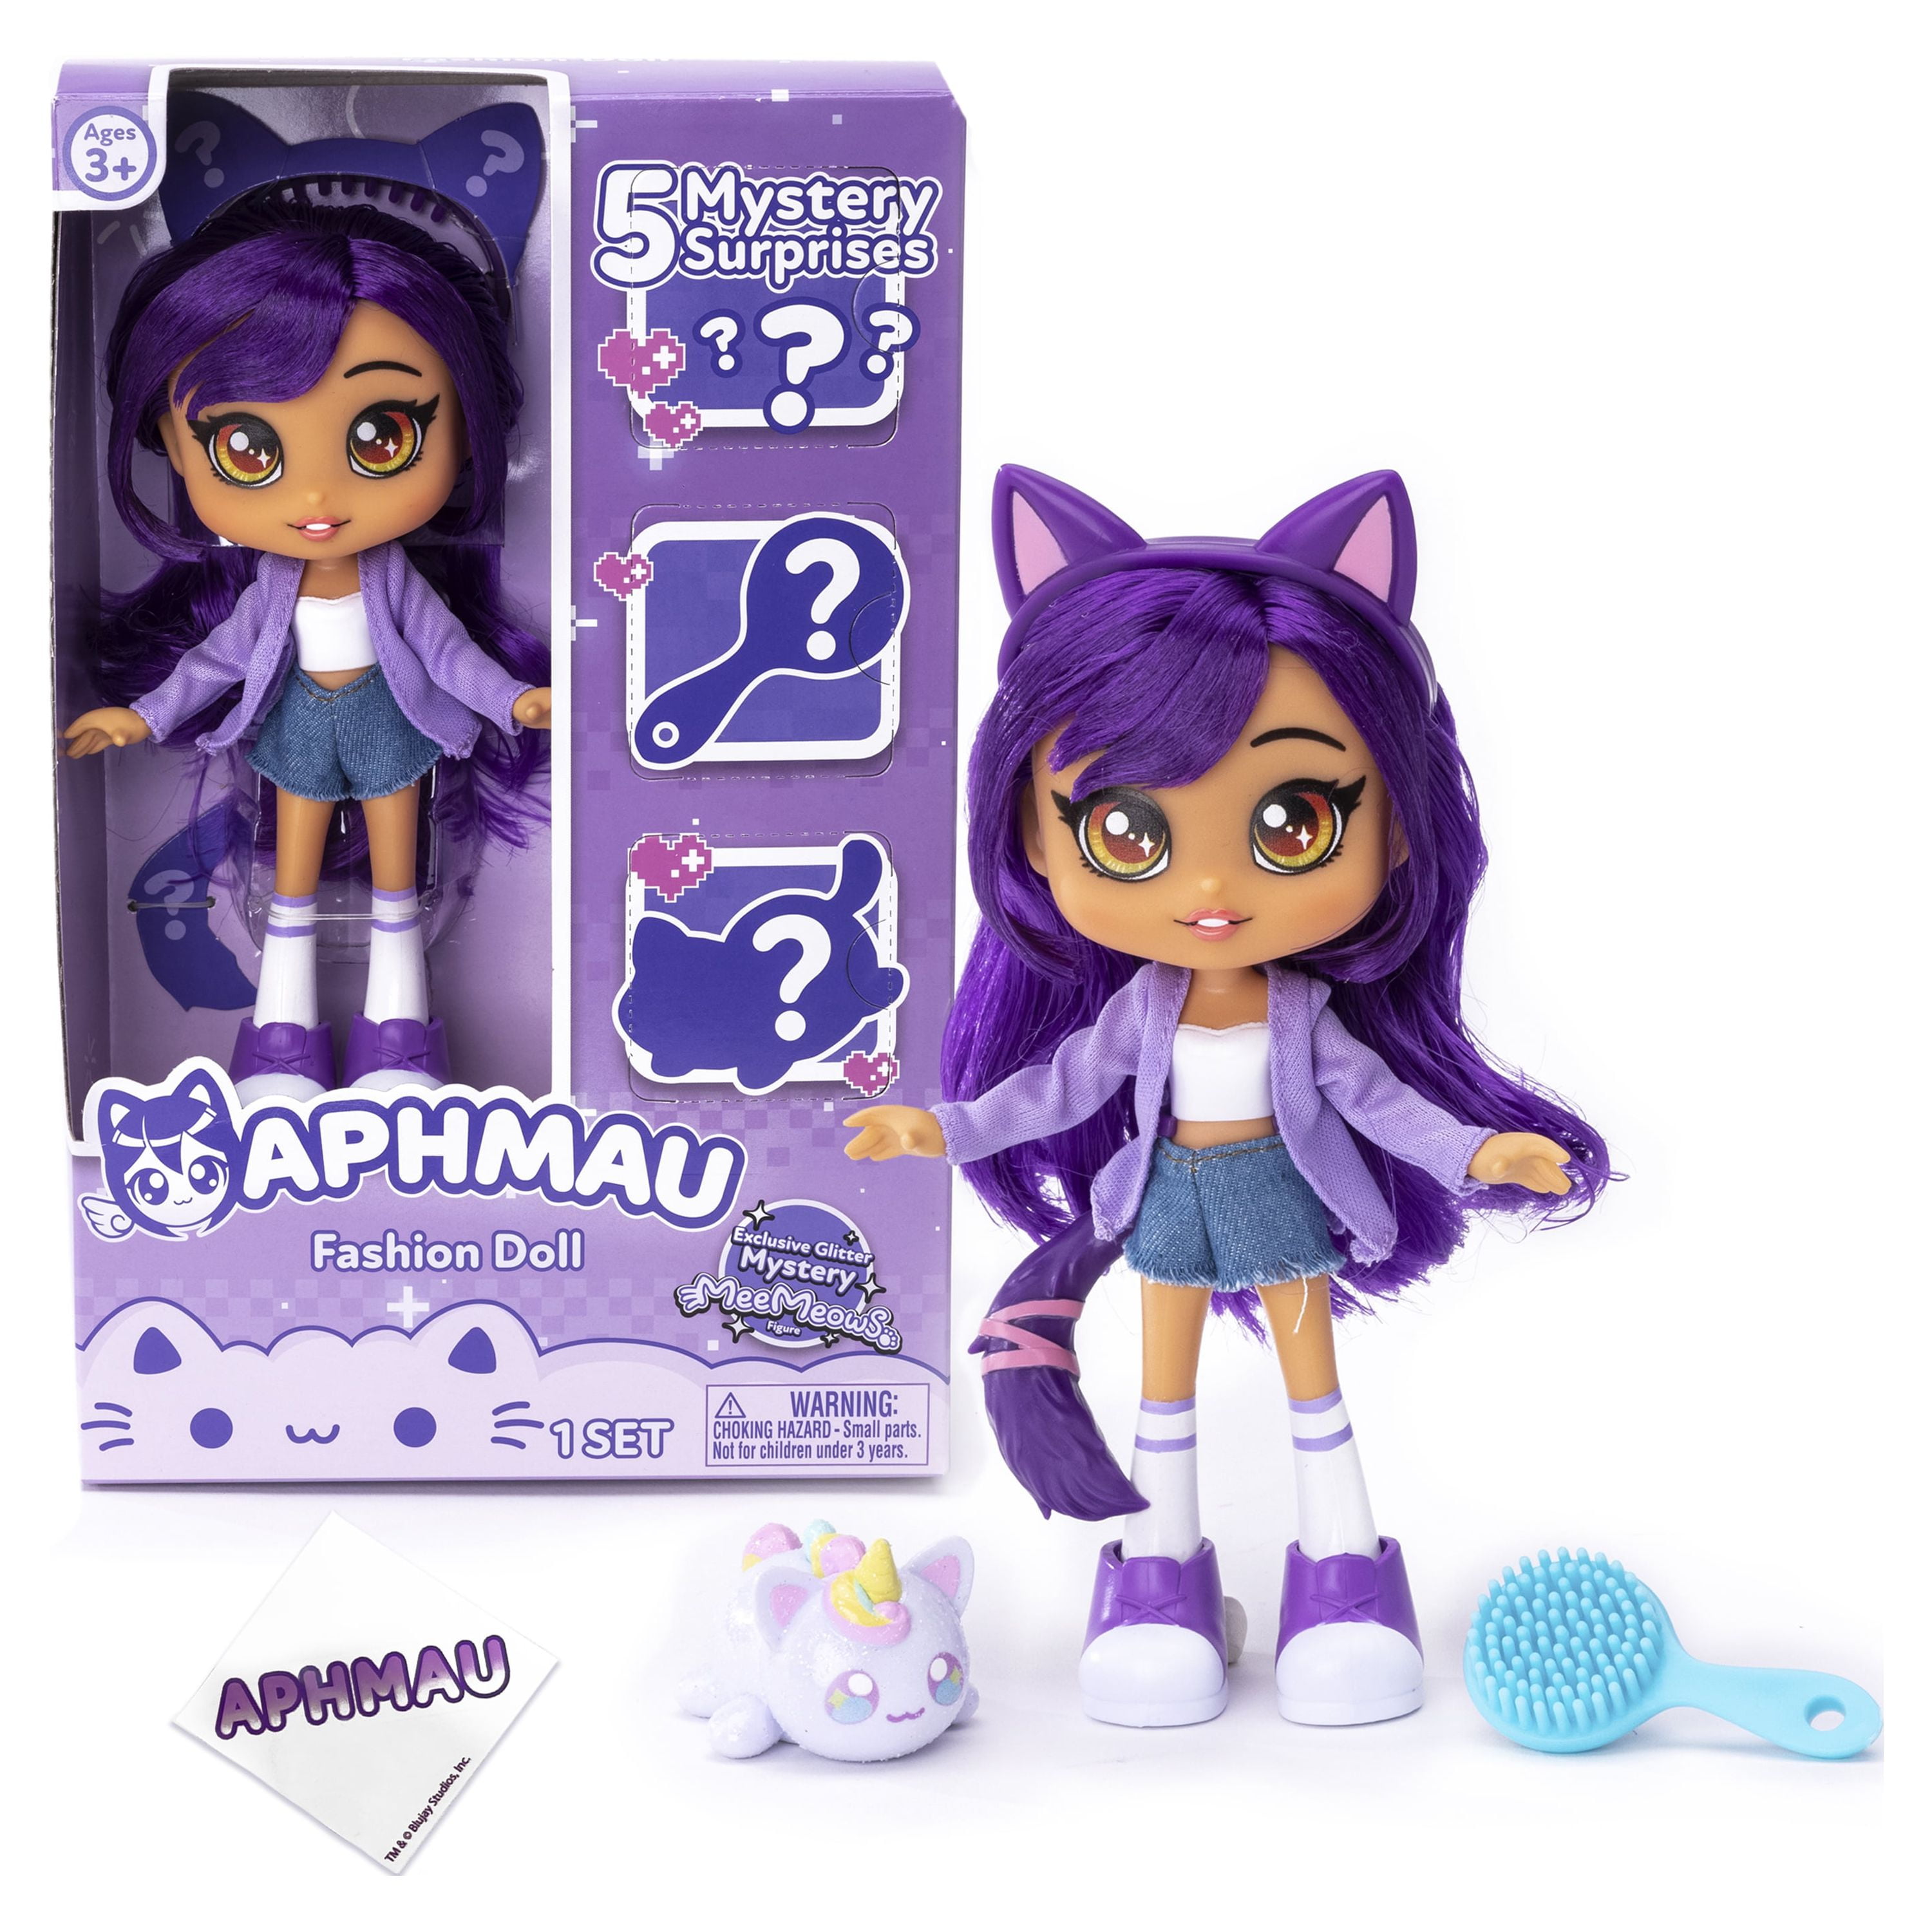 Aphmau Fashion Doll Unboxing and Review 